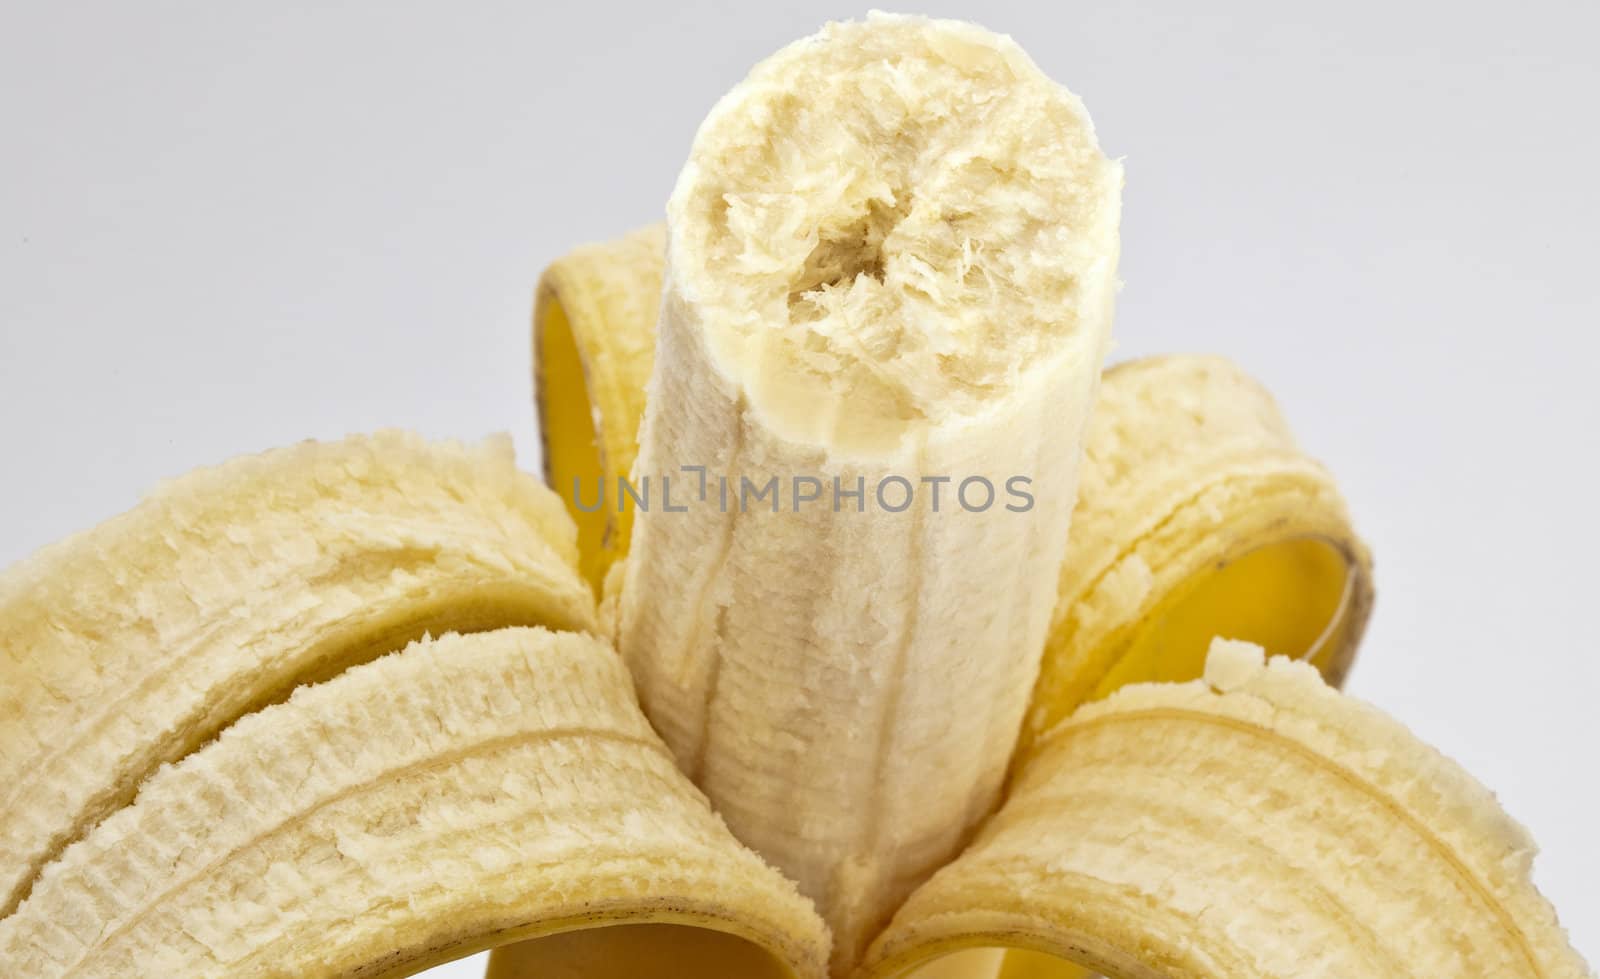 Very high quality, iso 100 banana picture.. ideal for sports and health topics...